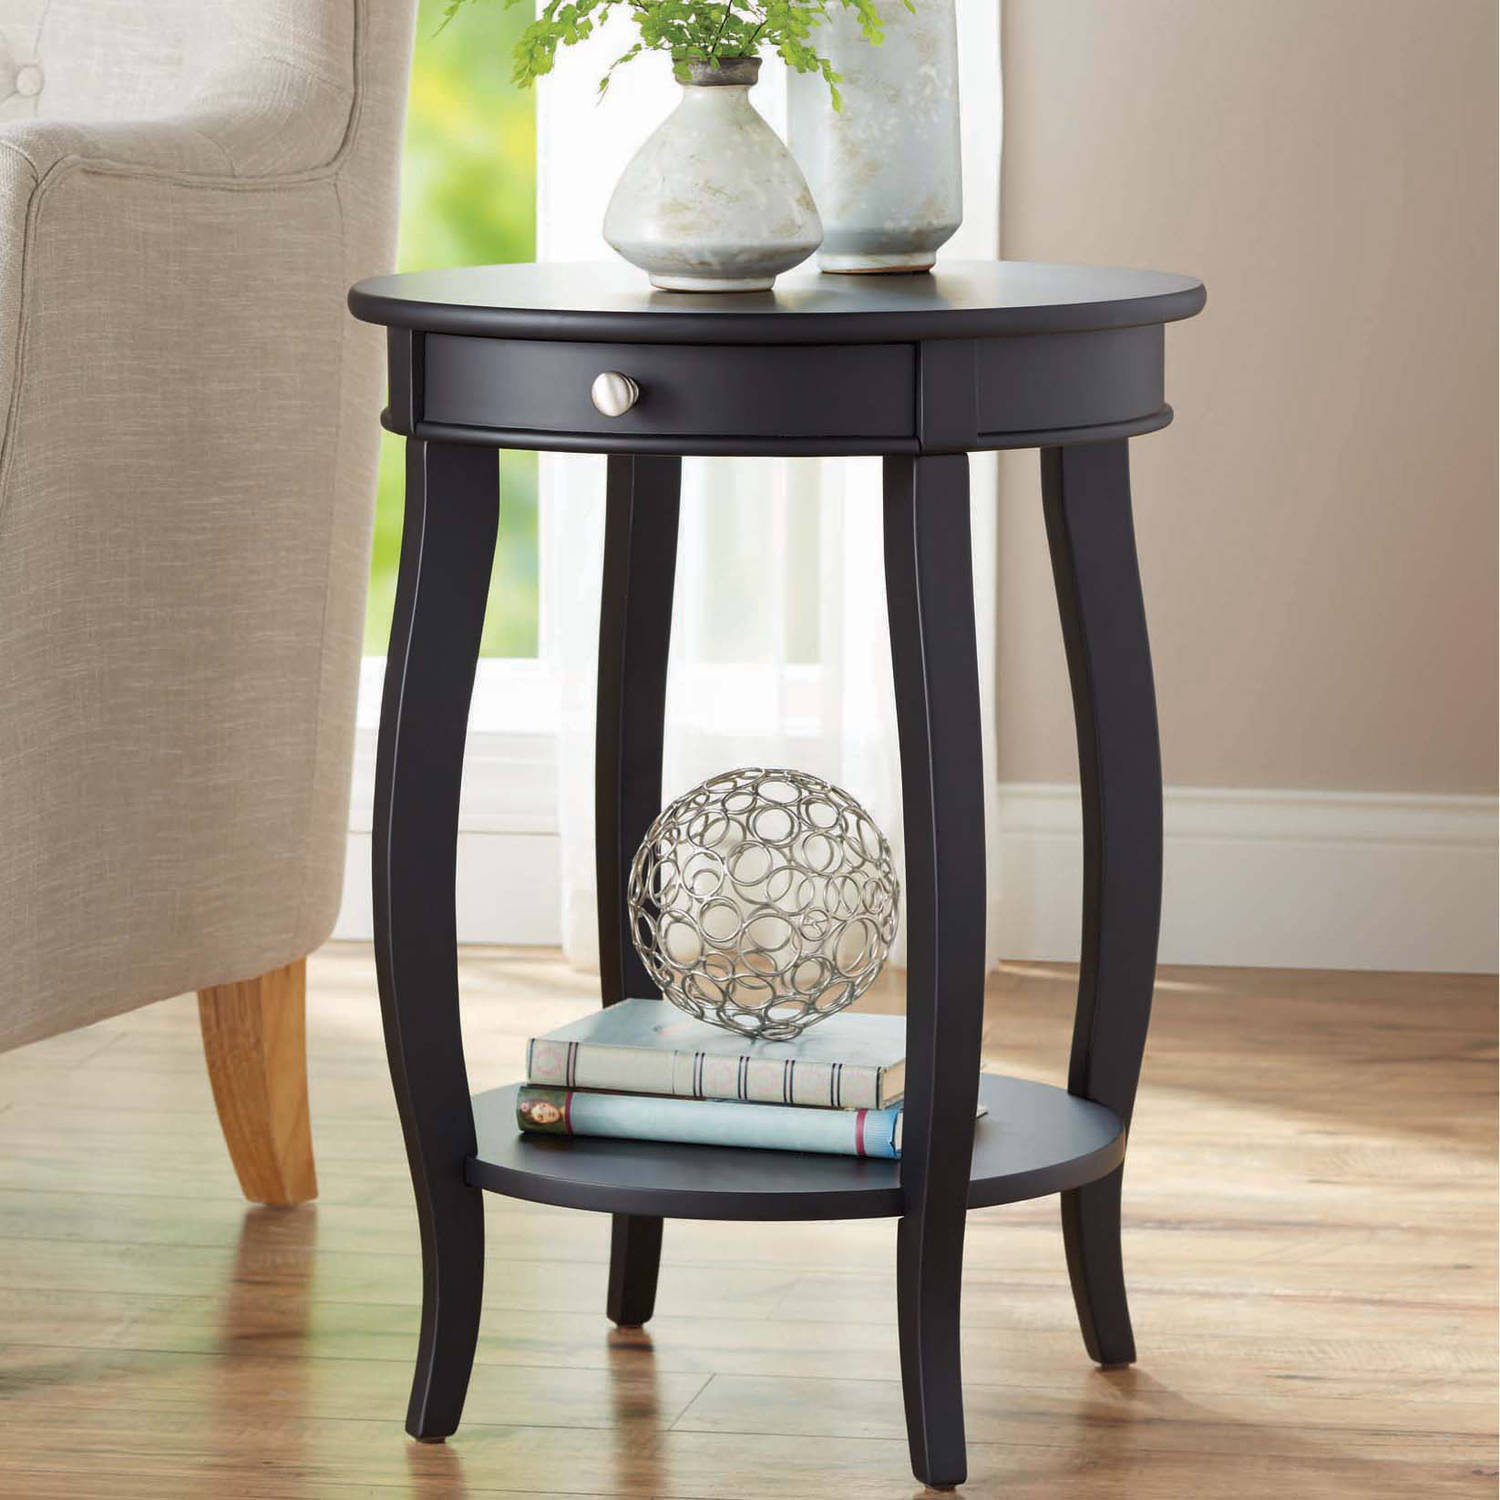 better homes gardens round accent table with drawer multiple unique small tables colors oval coffee storage super skinny end deck umbrella kohls bedspreads lampshade fittings